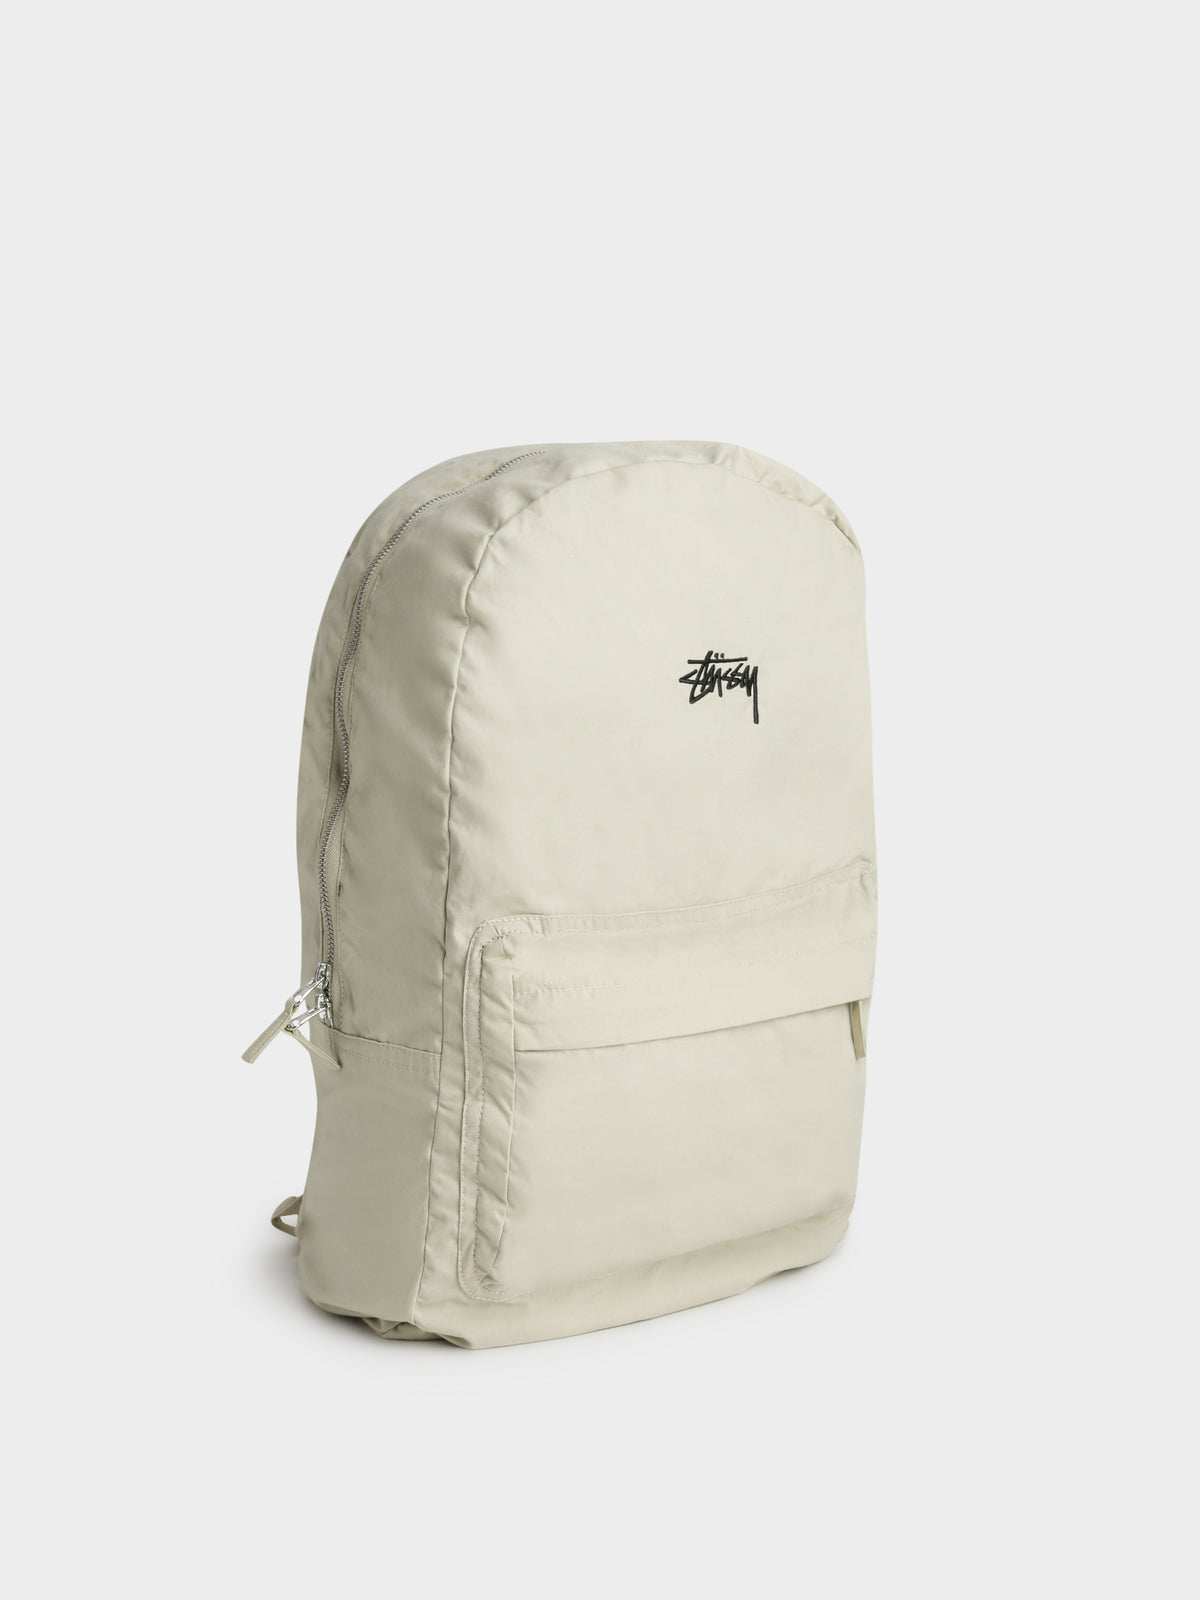 Stock Twill Beachpack in Sand